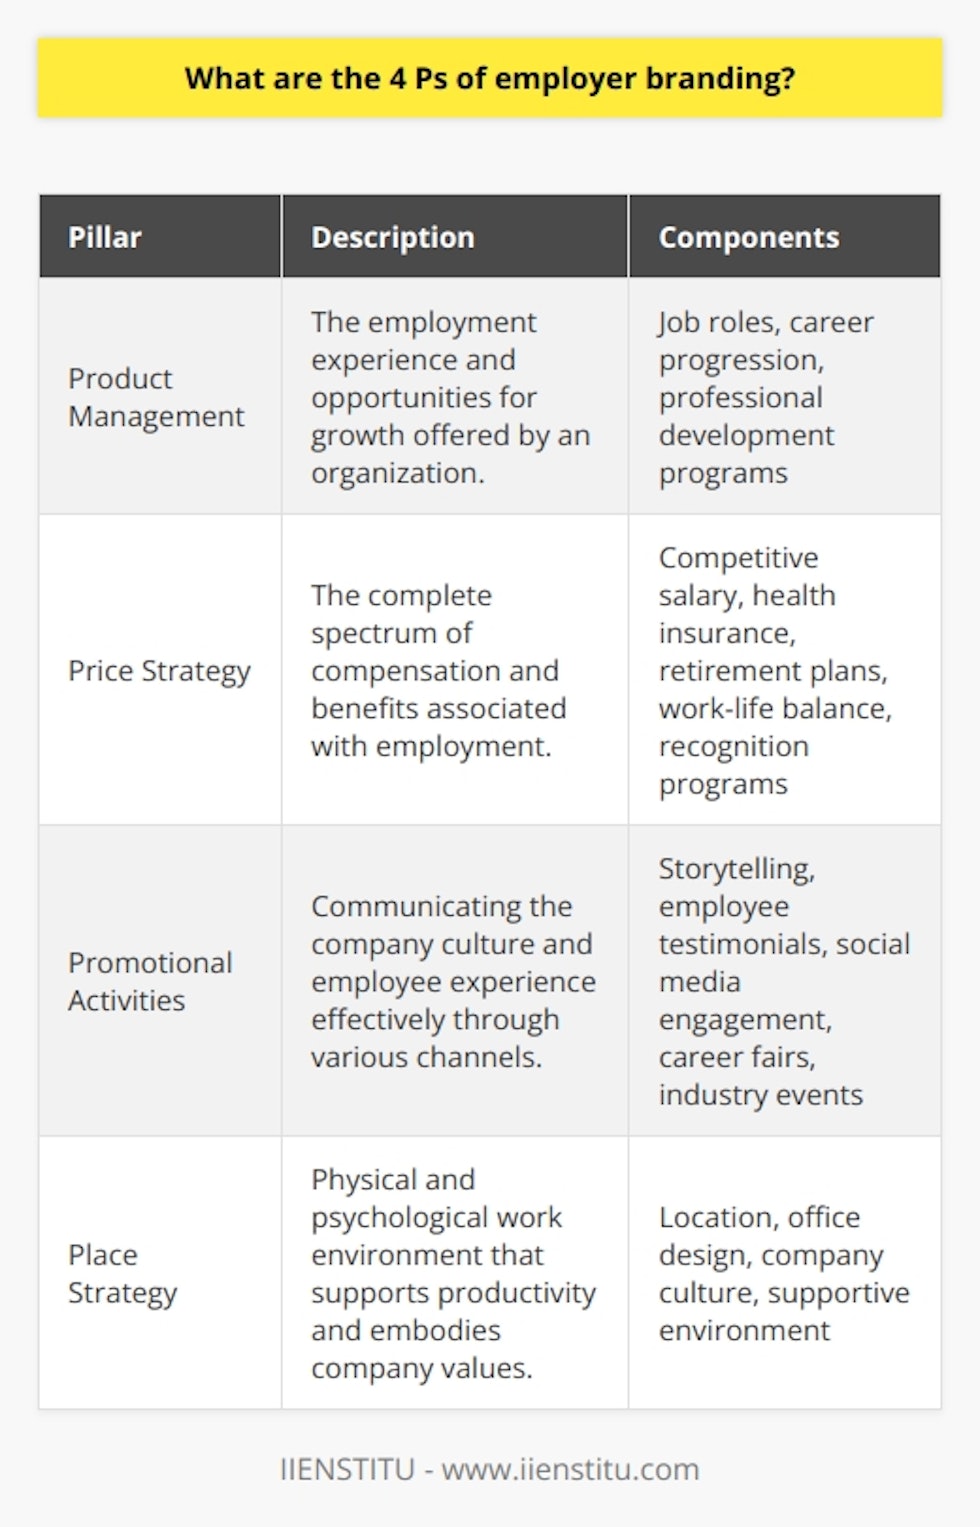 Employer branding has emerged as a crucial strategy for organizations looking to attract and retain talent in an increasingly competitive job market. The concept, although influenced by traditional marketing, adapts the well-known 4 Ps (Product, Price, Place, Promotion) to the context of human resources and talent acquisition. Here's how these four pillars embody the core of employer branding:Pillar 1: Product Management in Employer BrandingIn the realm of employer branding, Product refers to the employment experience an organization offers. A company must manage this 'product' by ensuring that the work experience — including job roles, career progression opportunities, and professional development programs — is appealing to current and prospective employees. An organization needs to continuously innovate and refine this experience, aligning it with the evolving expectations of the workforce. In this sense, the product is the sum of all the attributes that make the company a desirable place to work.Pillar 2: Price Strategy Reflects Compensation and BenefitsHere, Price transcends traditional monetary compensation and encompasses the complete spectrum of benefits and rewards associated with employment at the company. A competitive salary is a fundamental aspect, but modern candidates often value other components just as highly. These can include health insurance, retirement plans, work-life balance initiatives, recognition programs, and diverse career development opportunities. By calibrating the 'price' correctly, companies can stand out not just as paymasters but as employers that truly invest in their employees' well-being and future.Pillar 3: Promotional Activities to Showcase Employer BrandFor a brand to resonate, it must be communicated effectively — this is where Promotion comes into play. Just as with promoting products or services, employer branding relies on showcasing the company culture and employee experience across various channels. This involves crafting compelling narratives around the company's mission, values, and the impact of its work. Storytelling through employee testimonials, engaging with potential candidates on social media, and maintaining an active presence in career fairs and industry events are all critical promotional activities that bring the employer brand to life.Pillar 4: Place Strategy Emphasizes Work EnvironmentFinally, Place, in the context of employer branding, refers to the physical and psychological work environment that the company cultivates. It includes the geographical location of the workplace, office architecture, and design, as well as the intangible atmosphere that constitutes the company culture. This pillar stresses the importance of providing an environment that not only supports productivity and collaboration but also embodies the organization's identity and values. A thoughtful place strategy considers how the environment can positively influence recruitment and retention, making the company a sought-after place to work.In essence, the 4 Ps of employer branding represent a comprehensive approach to shaping how a business is viewed as an employer. Companies that strategically manage these aspects can effectively position themselves to attract like-minded individuals who are eager to contribute to the organization's success. IIENSTITU, known for its focus on educating professionals, emphasizes these principles in its teachings, preparing learners to build robust and resonant employer brands. As the job market evolves, employer branding will continue to play a fundamental role in distinguishing companies as employers of choice.